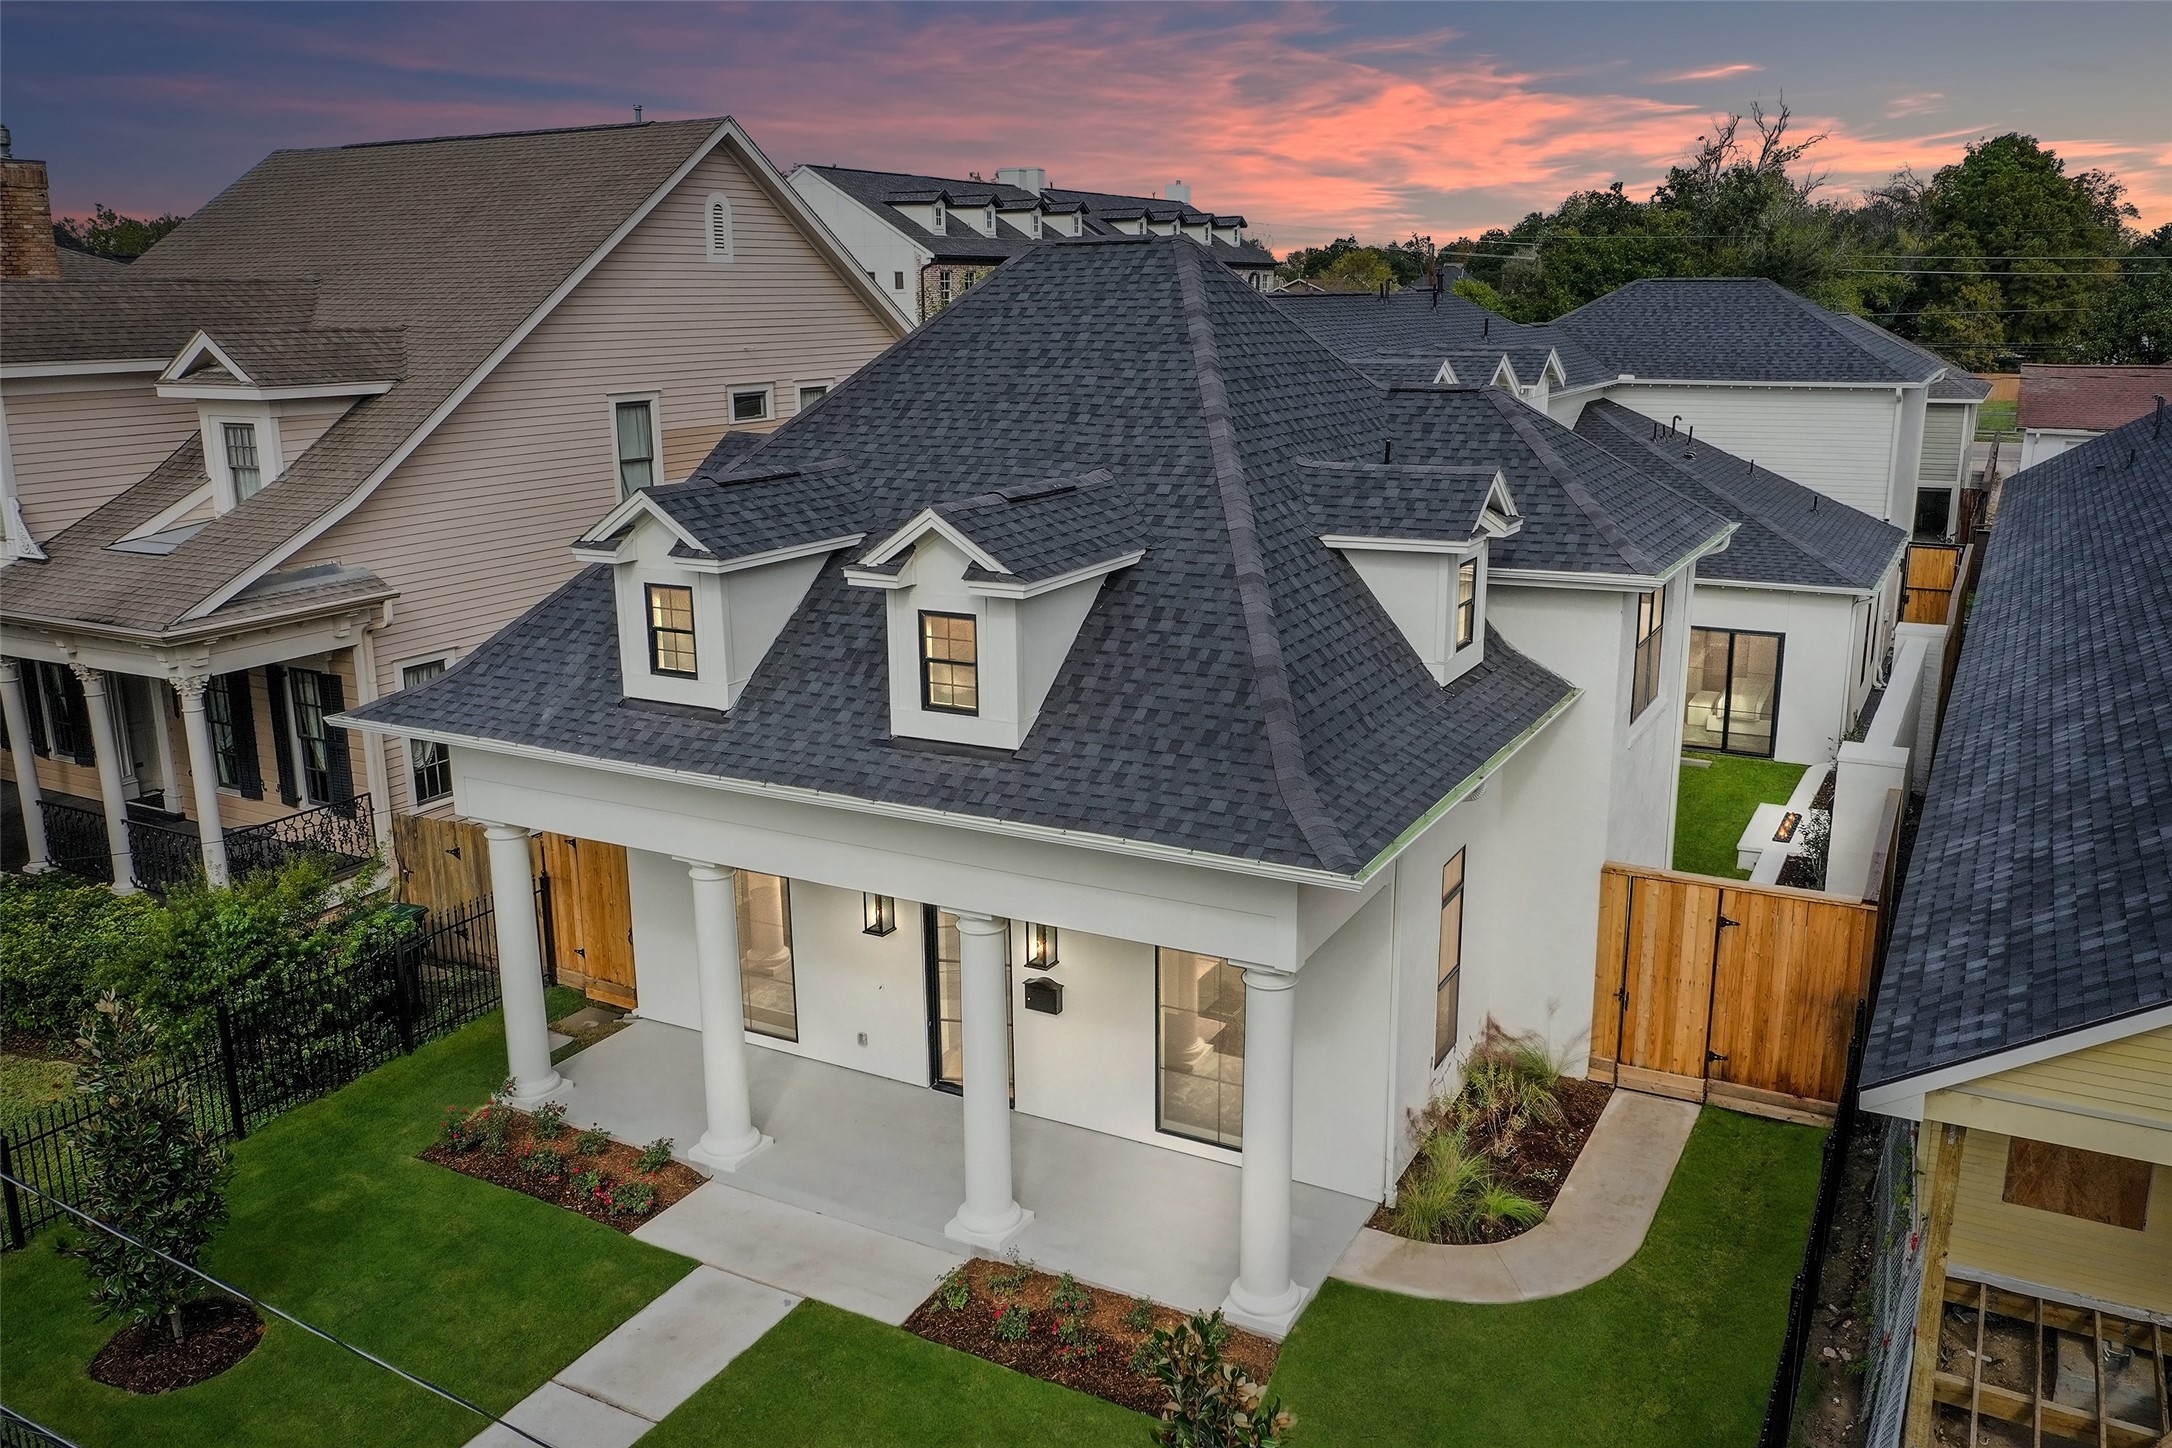 This newly built custom home in the heart of the Houston Heights has stunning features.